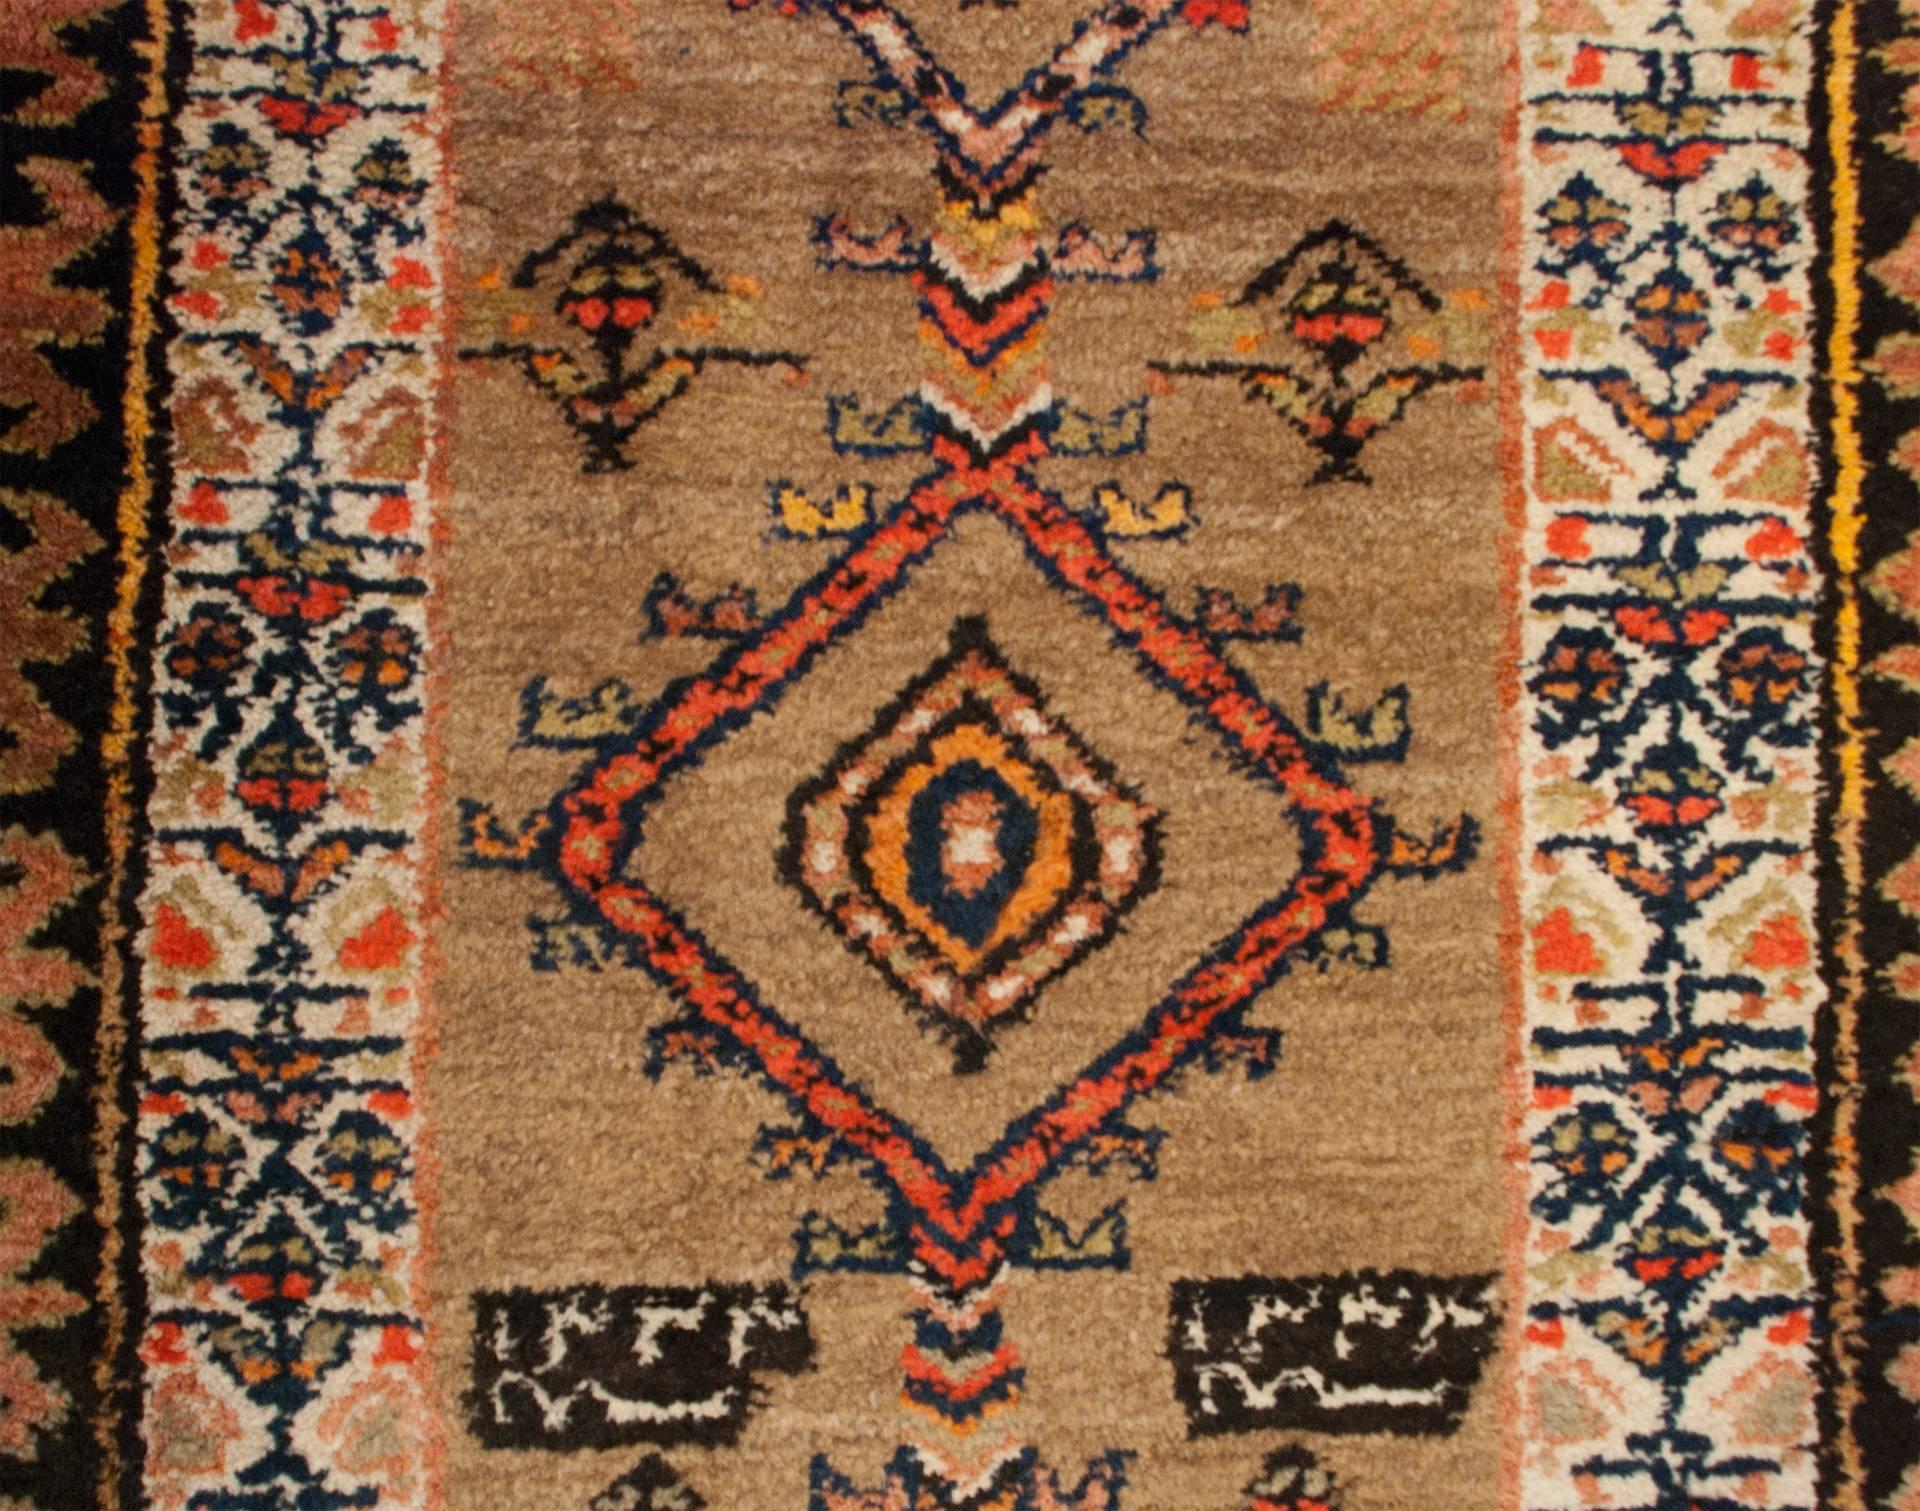 An early 20th century Persian Serab runner with multiple diamond and floral medallions on an natural, undyed, camel hair background, surrounded by a wonderful, graphic, red and brown and floral border.